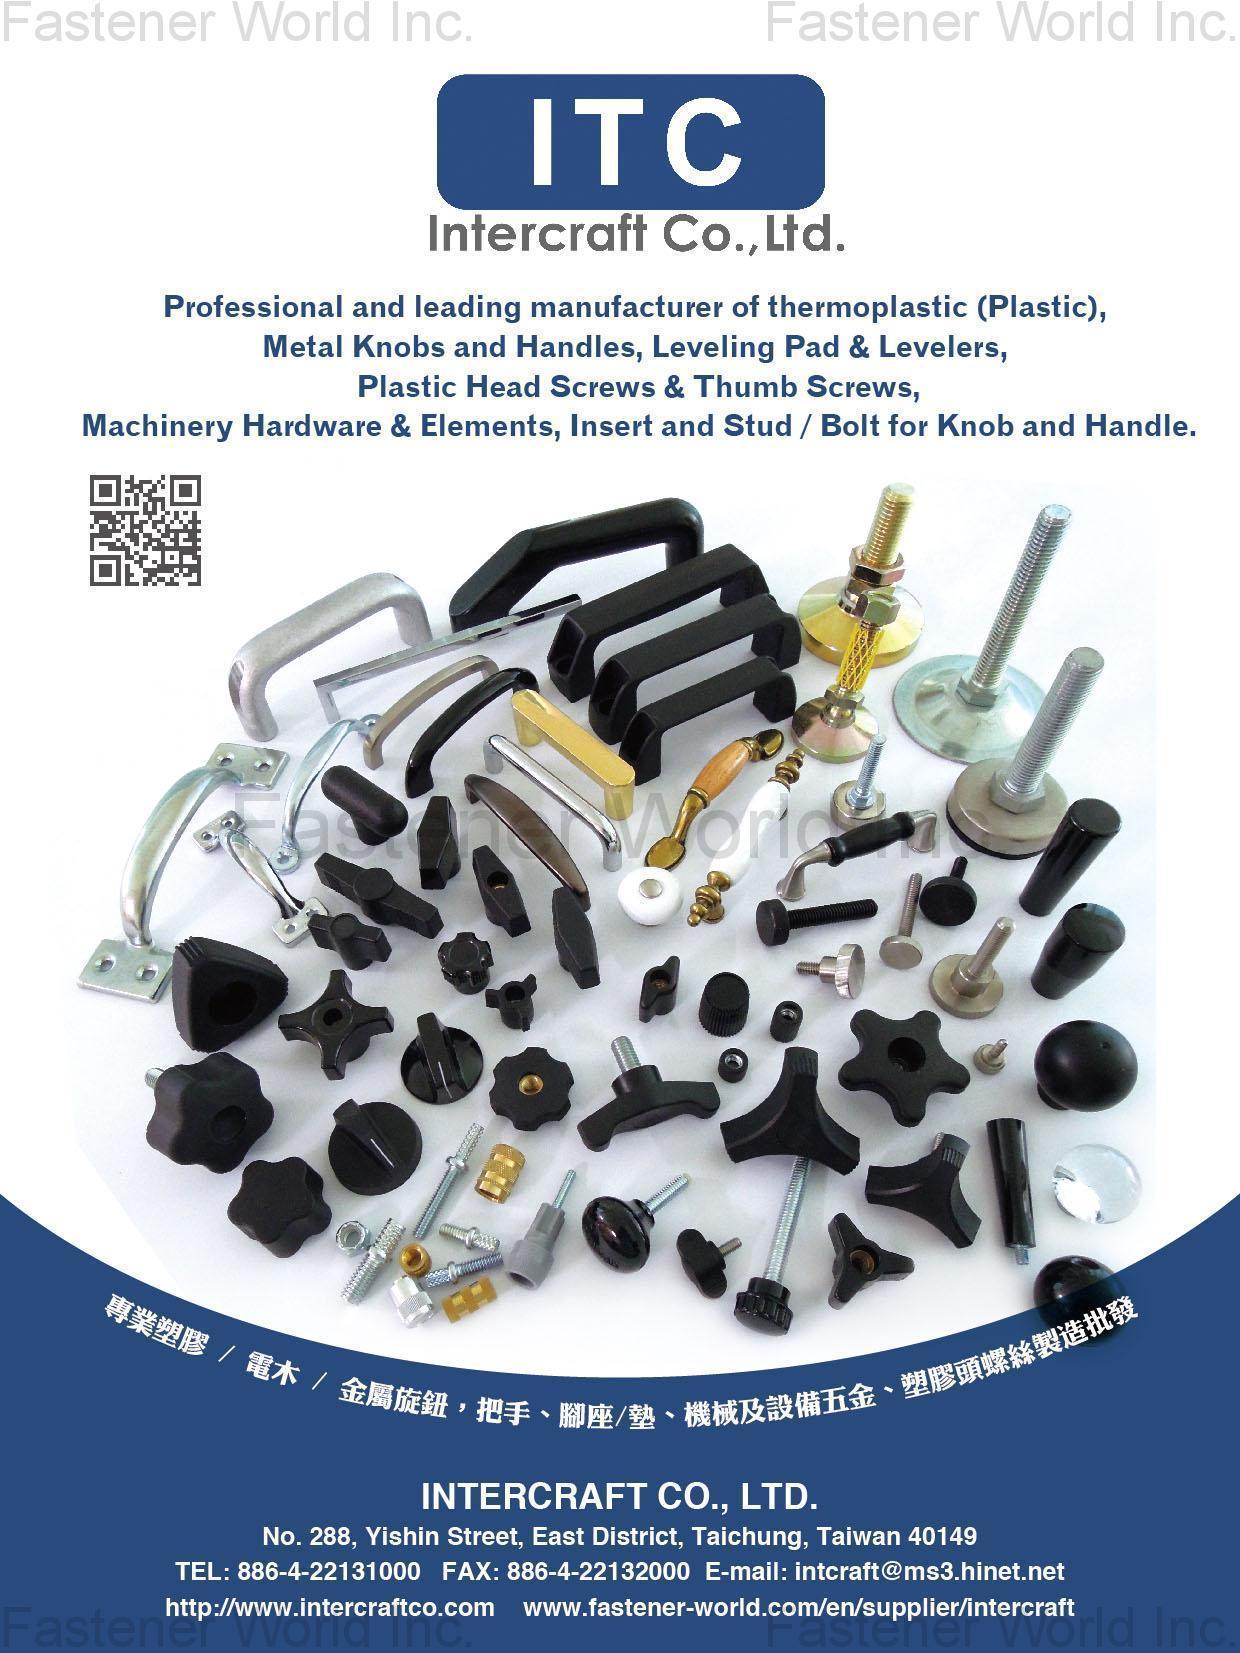 INTERCRAFT CO., LTD. , Thermoplastic (Plastic), Metal Knobs and Handles, Leveling Pad & Leverlers, Plastic Head Screws & Thumb Screws, Machinery Hardware & Elements, Insert and Stud / Bolt for Knob and Handle